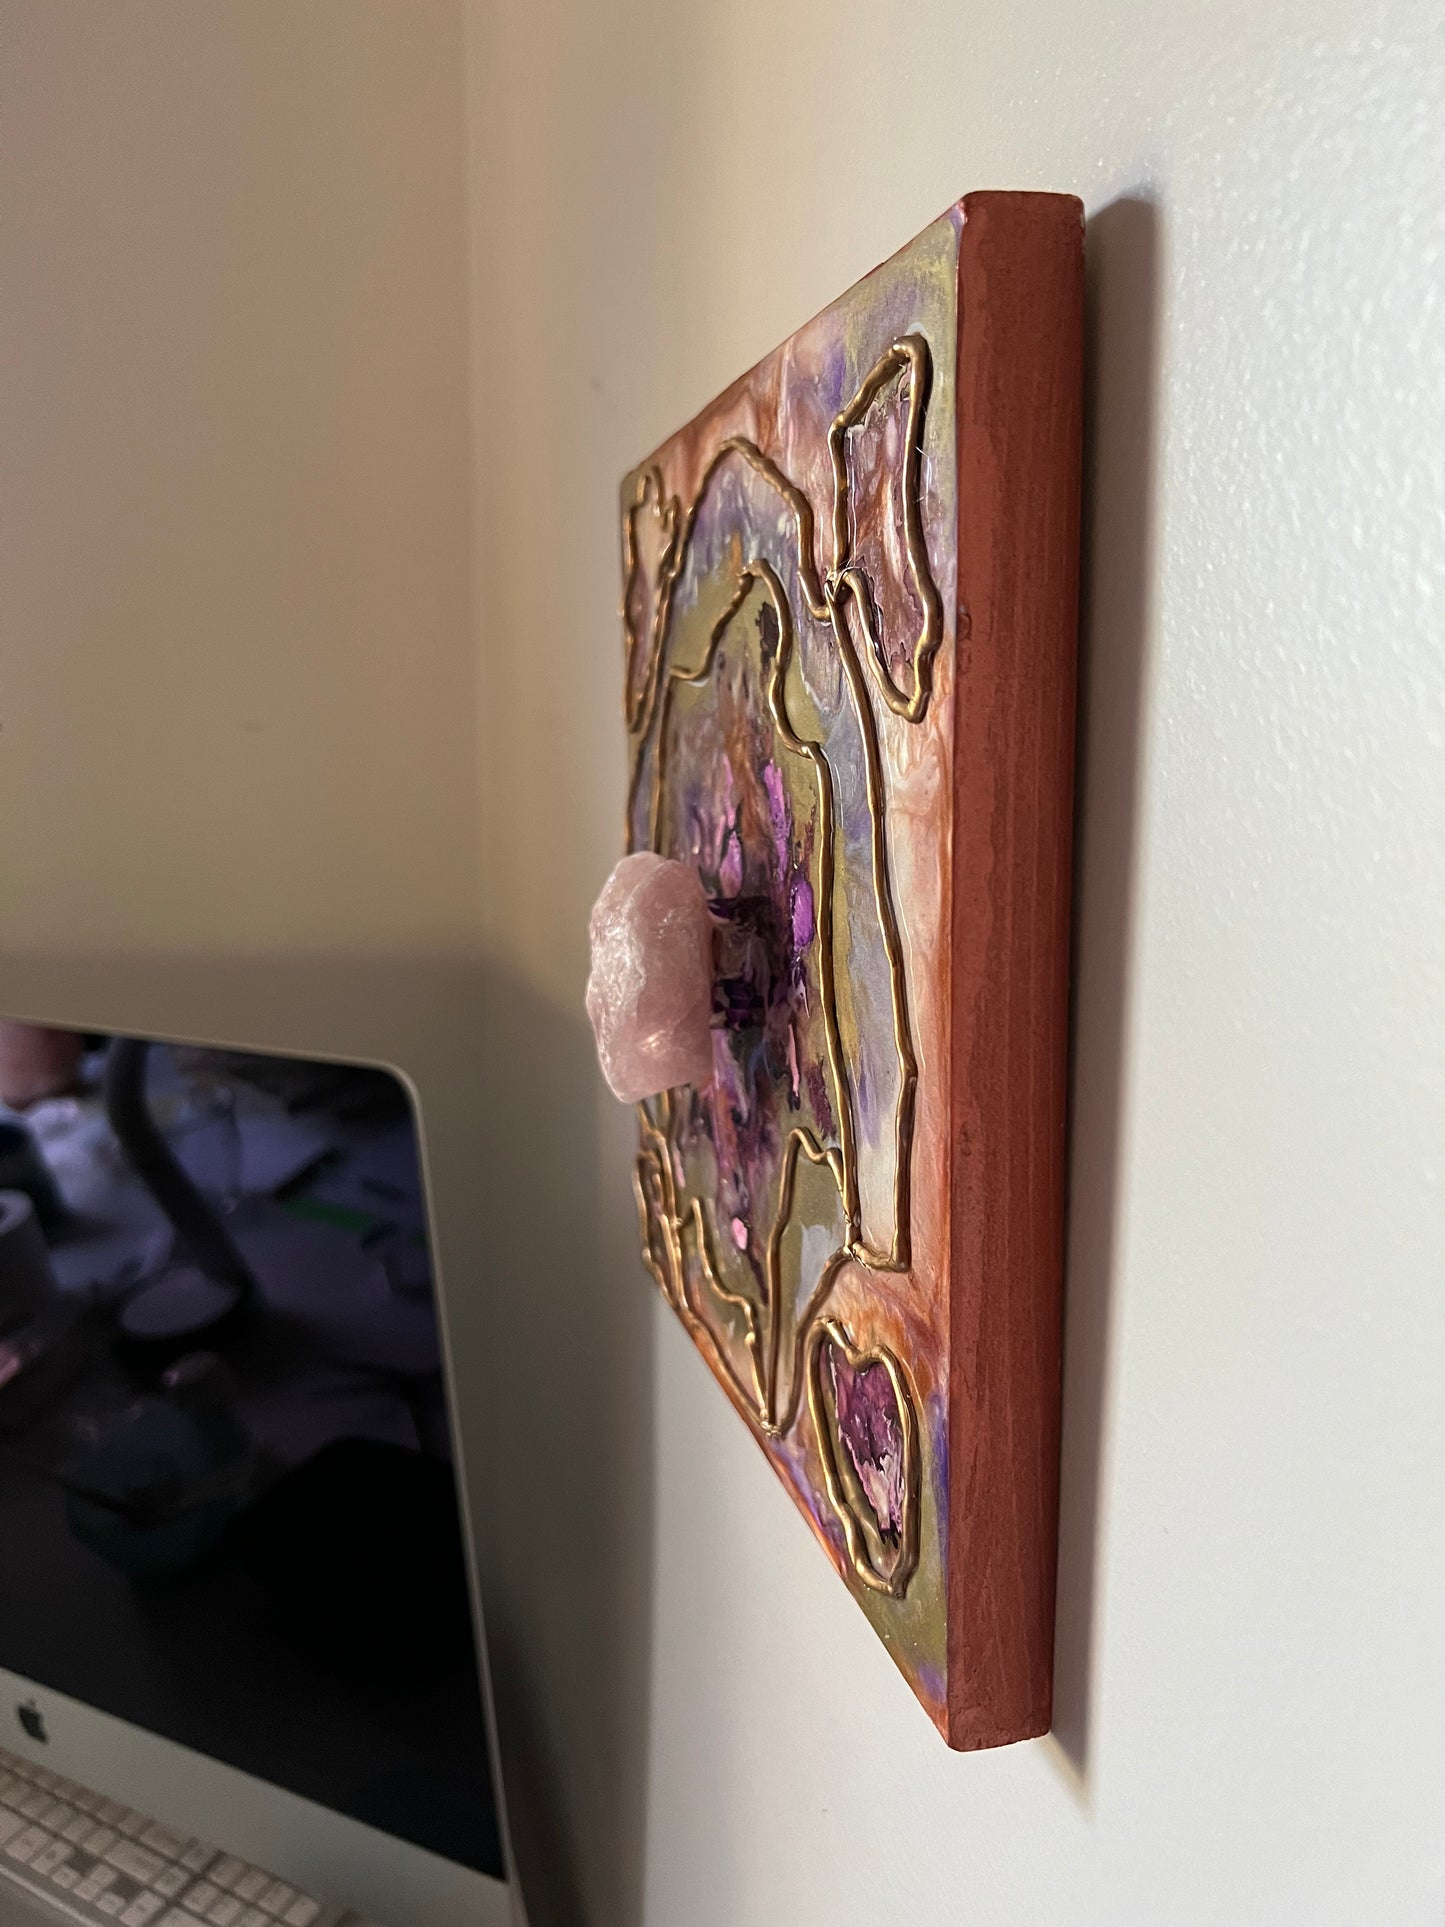 LOVE YOURSELF FIRST / Raw Rose Quartz / Geode Inspired Wall Art / One of a Kind / Resin Art